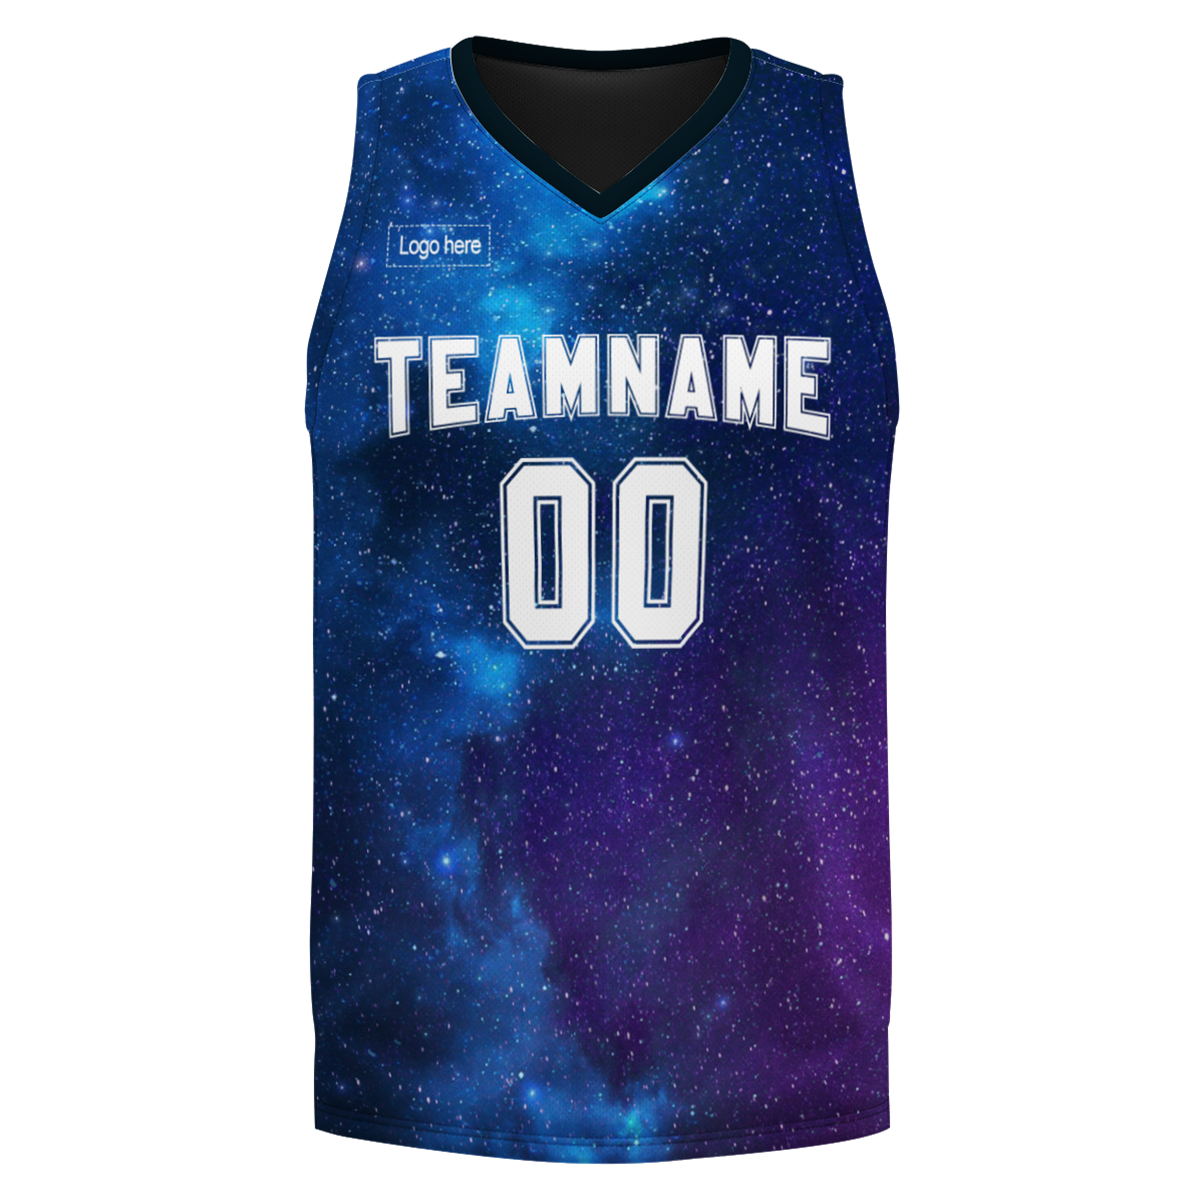 newest-sports-basketball-jersey-uniforms-design-sublimation-customize-print-on-demand-basketball-suits-at-cj-pod-4